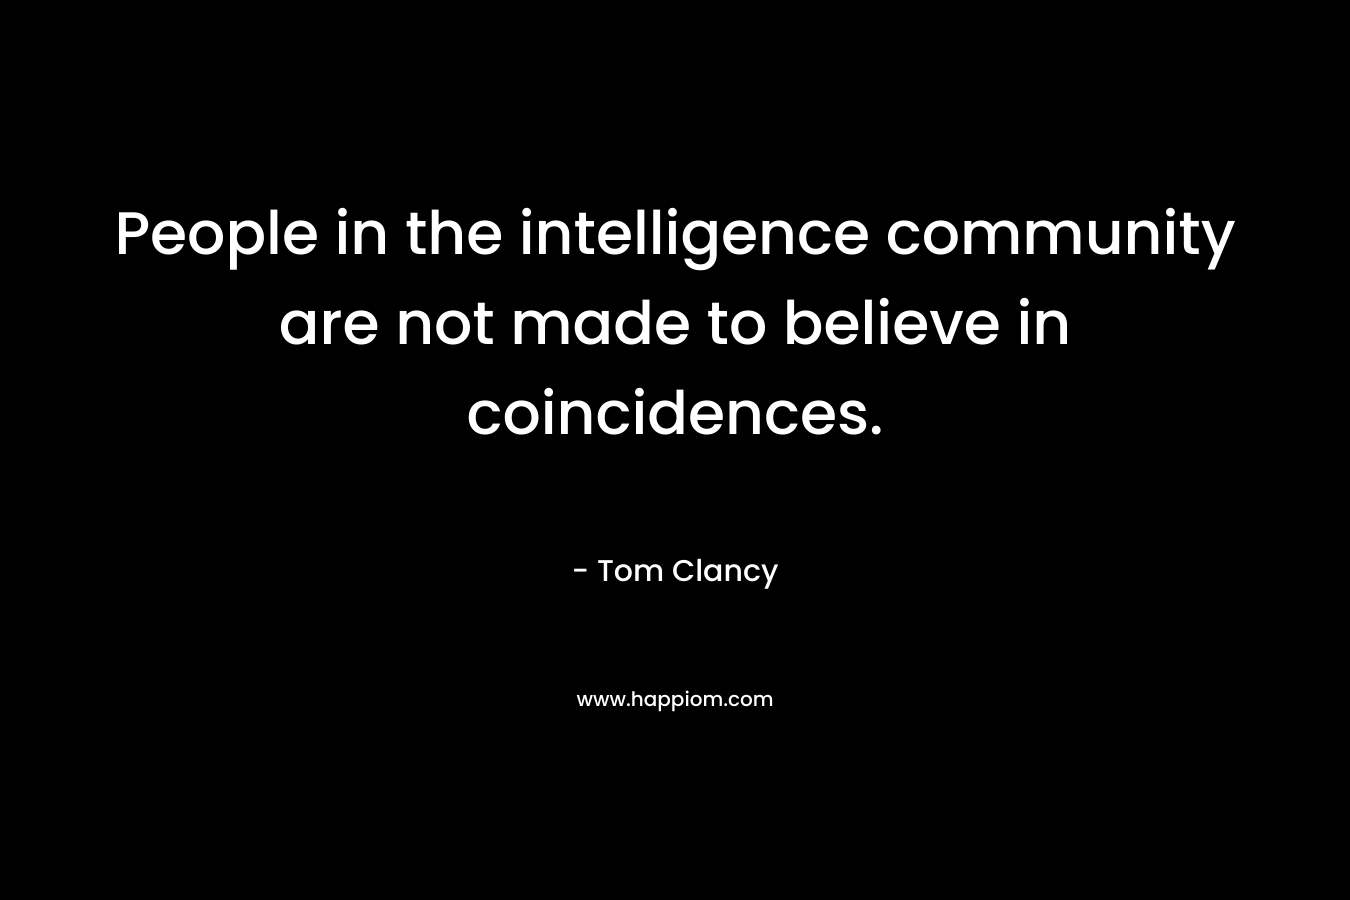 People in the intelligence community are not made to believe in coincidences.